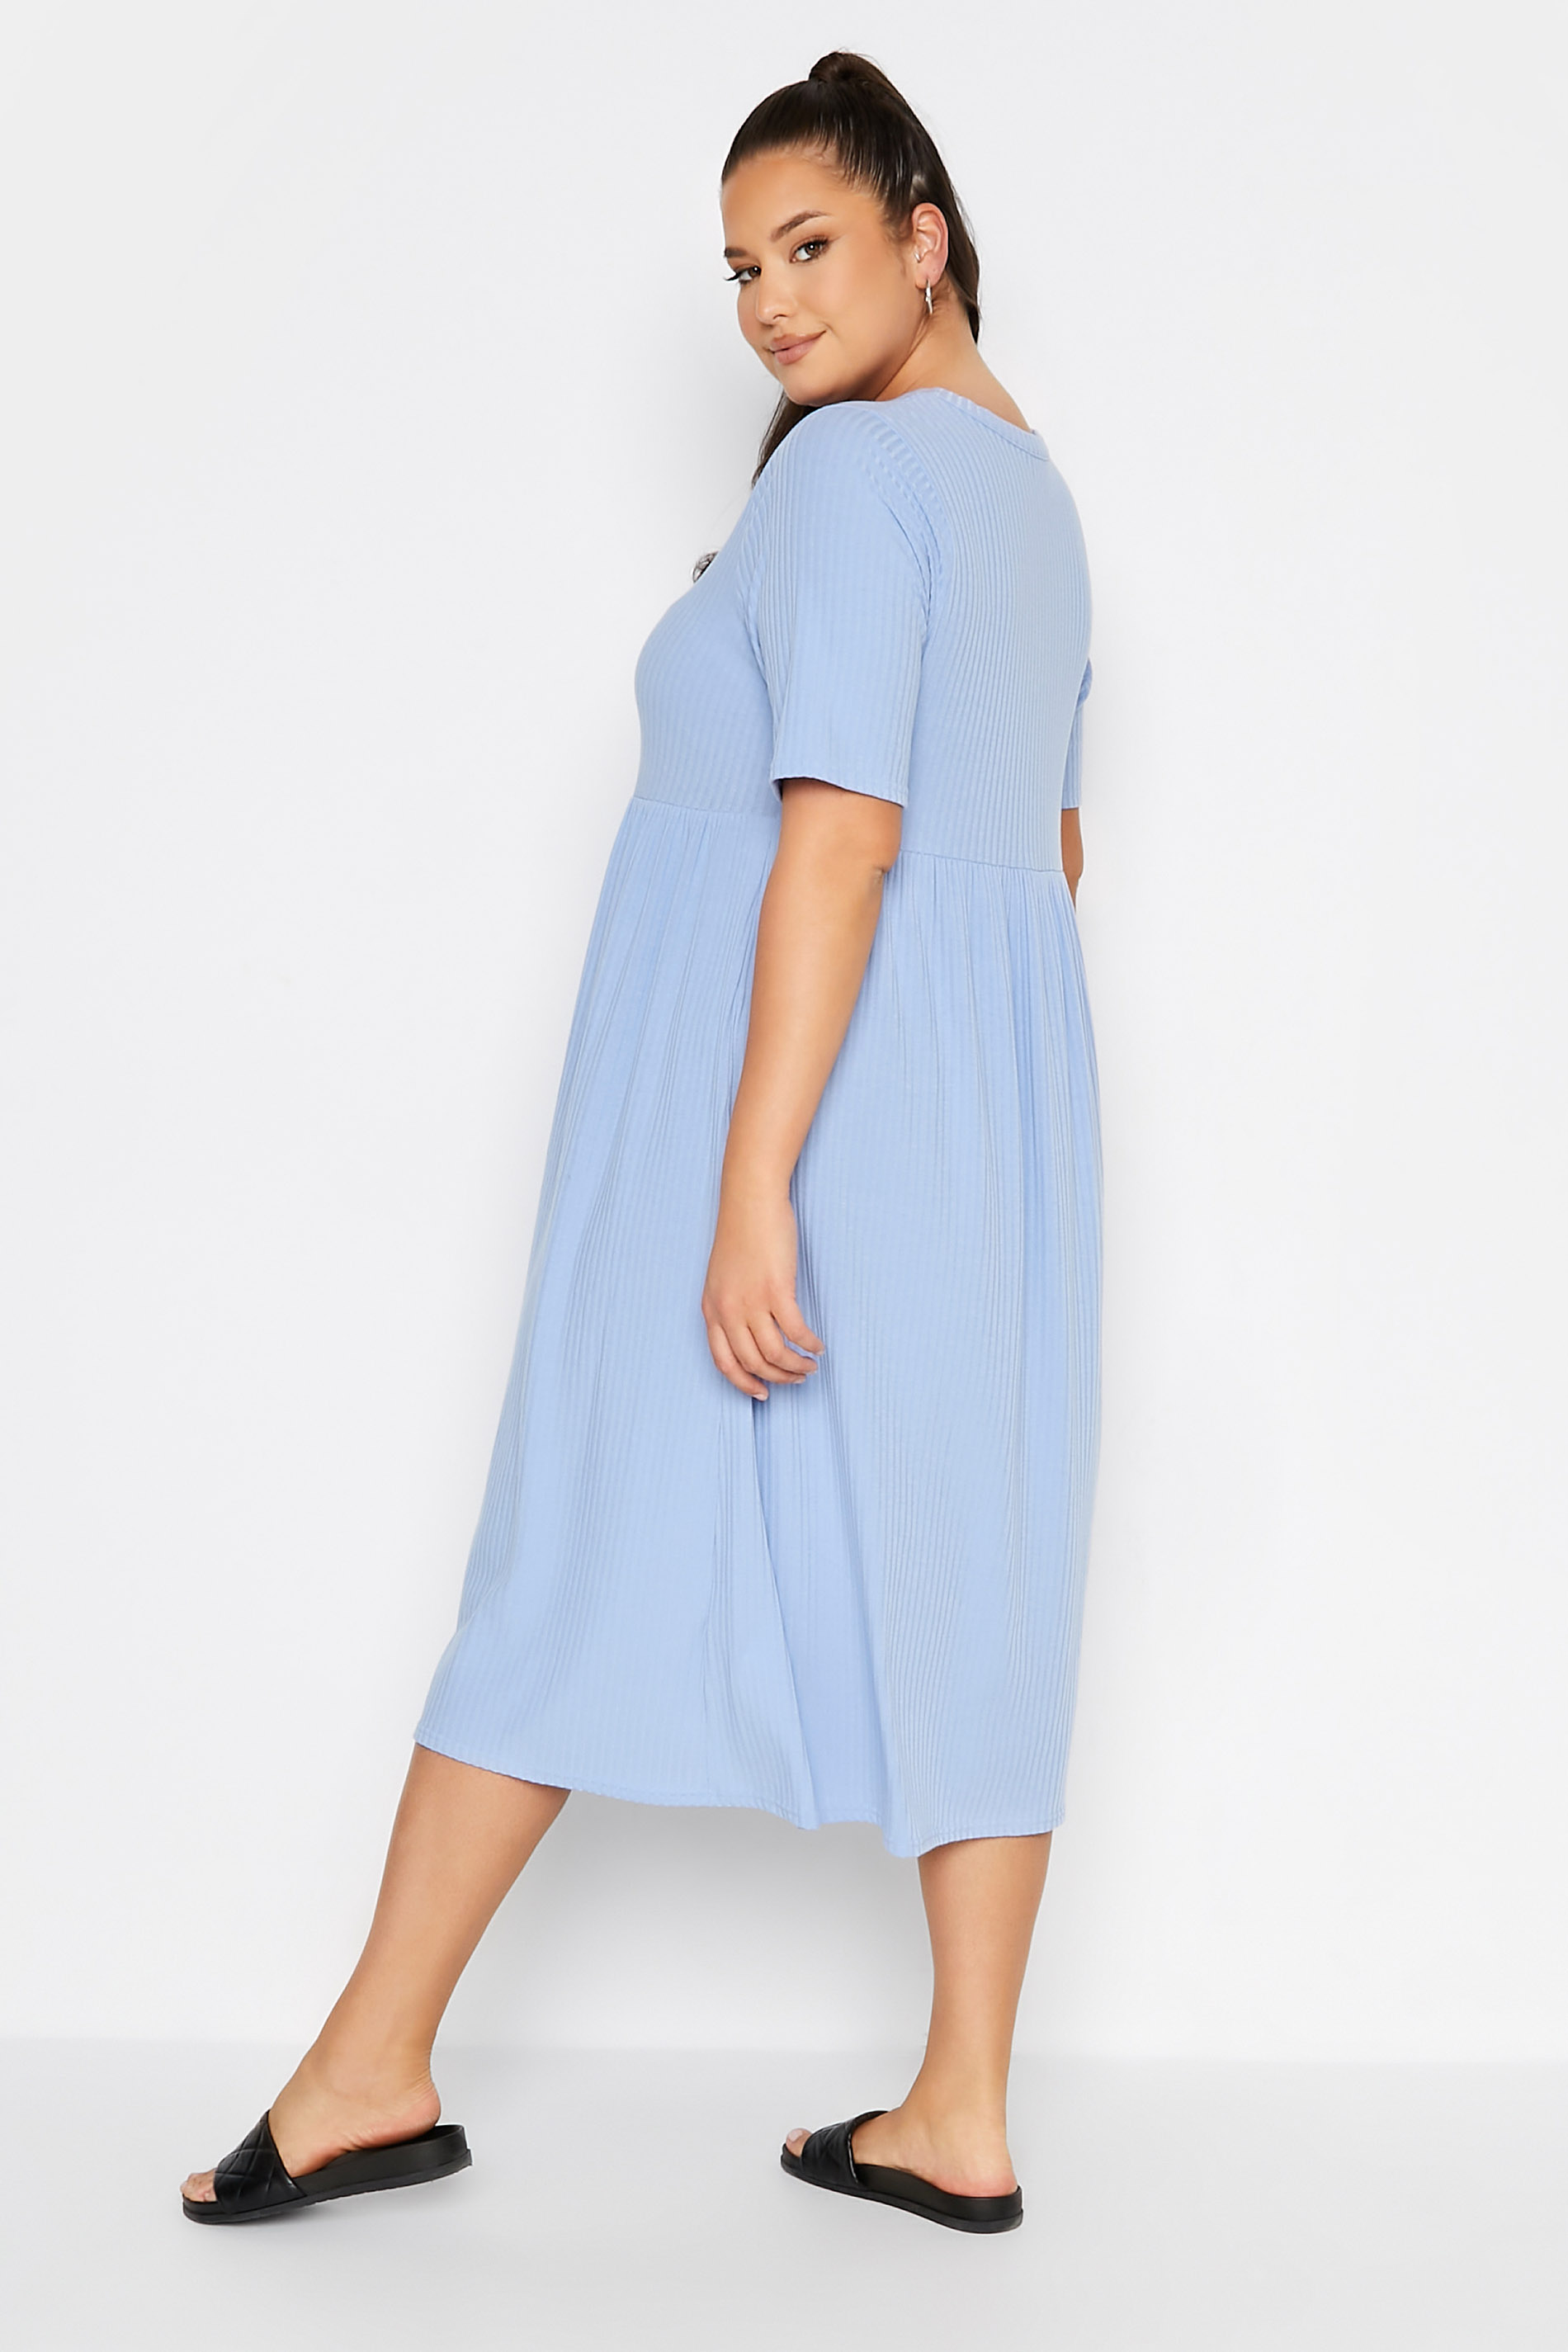 LIMITED COLLECTION Plus Size Light Blue Ribbed Peplum Midi Dress | Yours Clothing  3